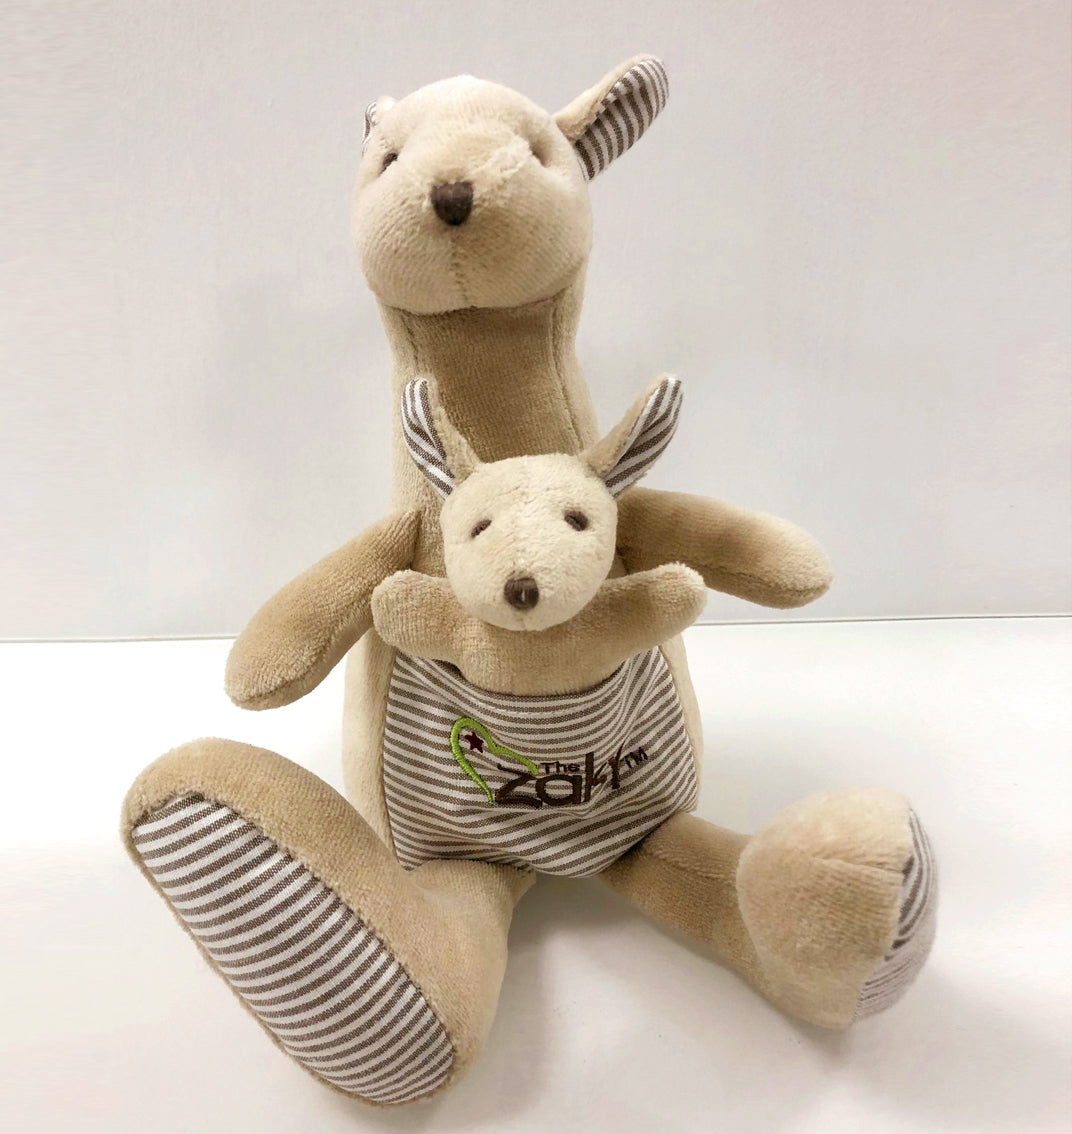 The Zaky® ROO (plush toy) - Is now available!